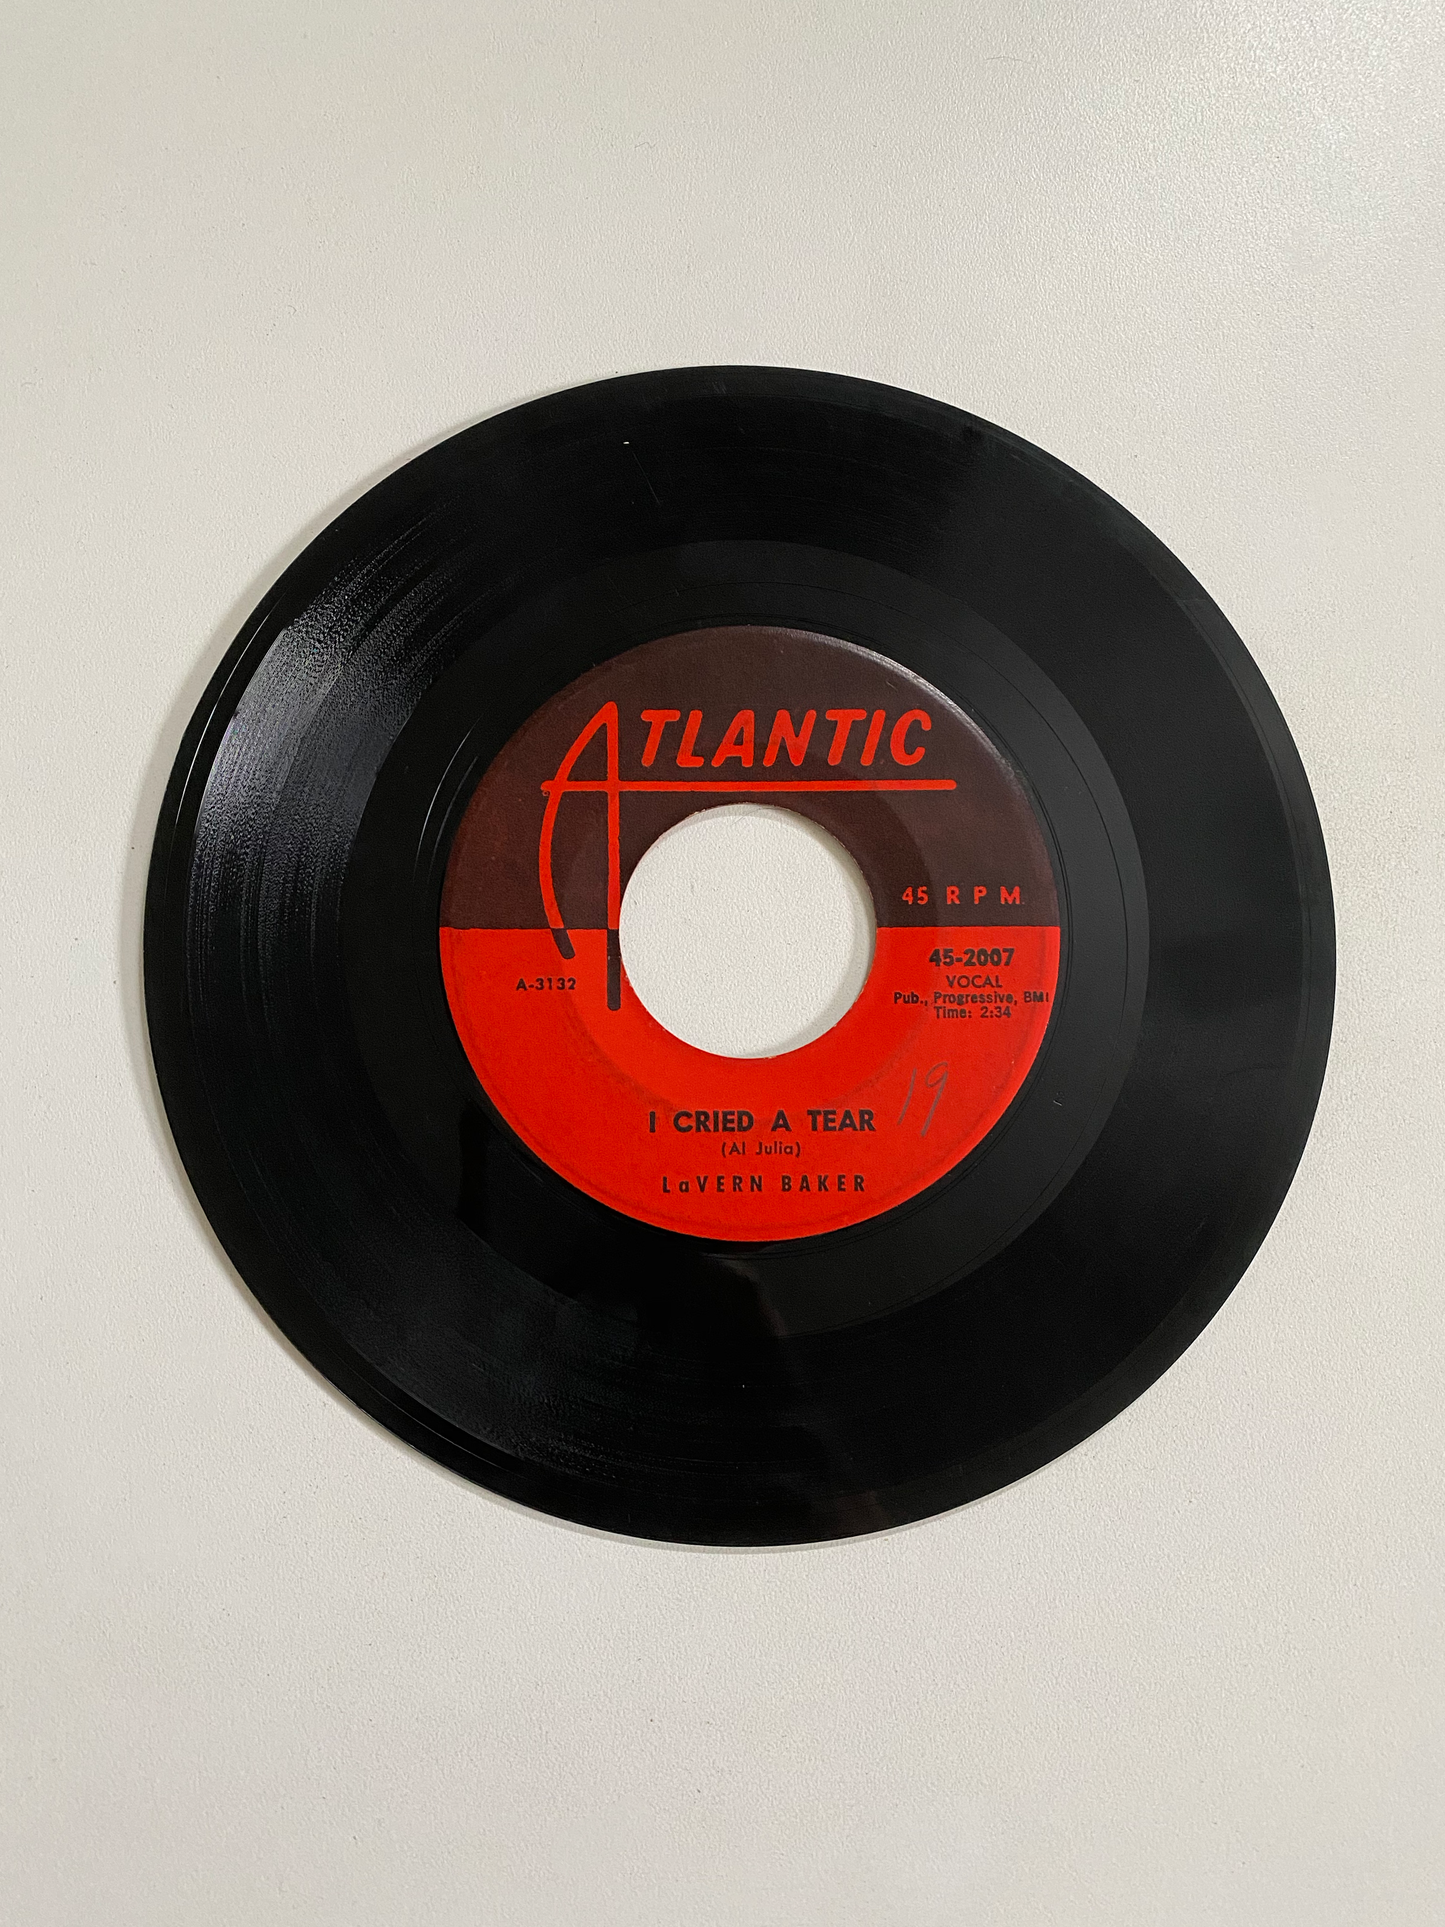 LaVern Baker - Dix-a-Billy | 45 The Vintedge Co.